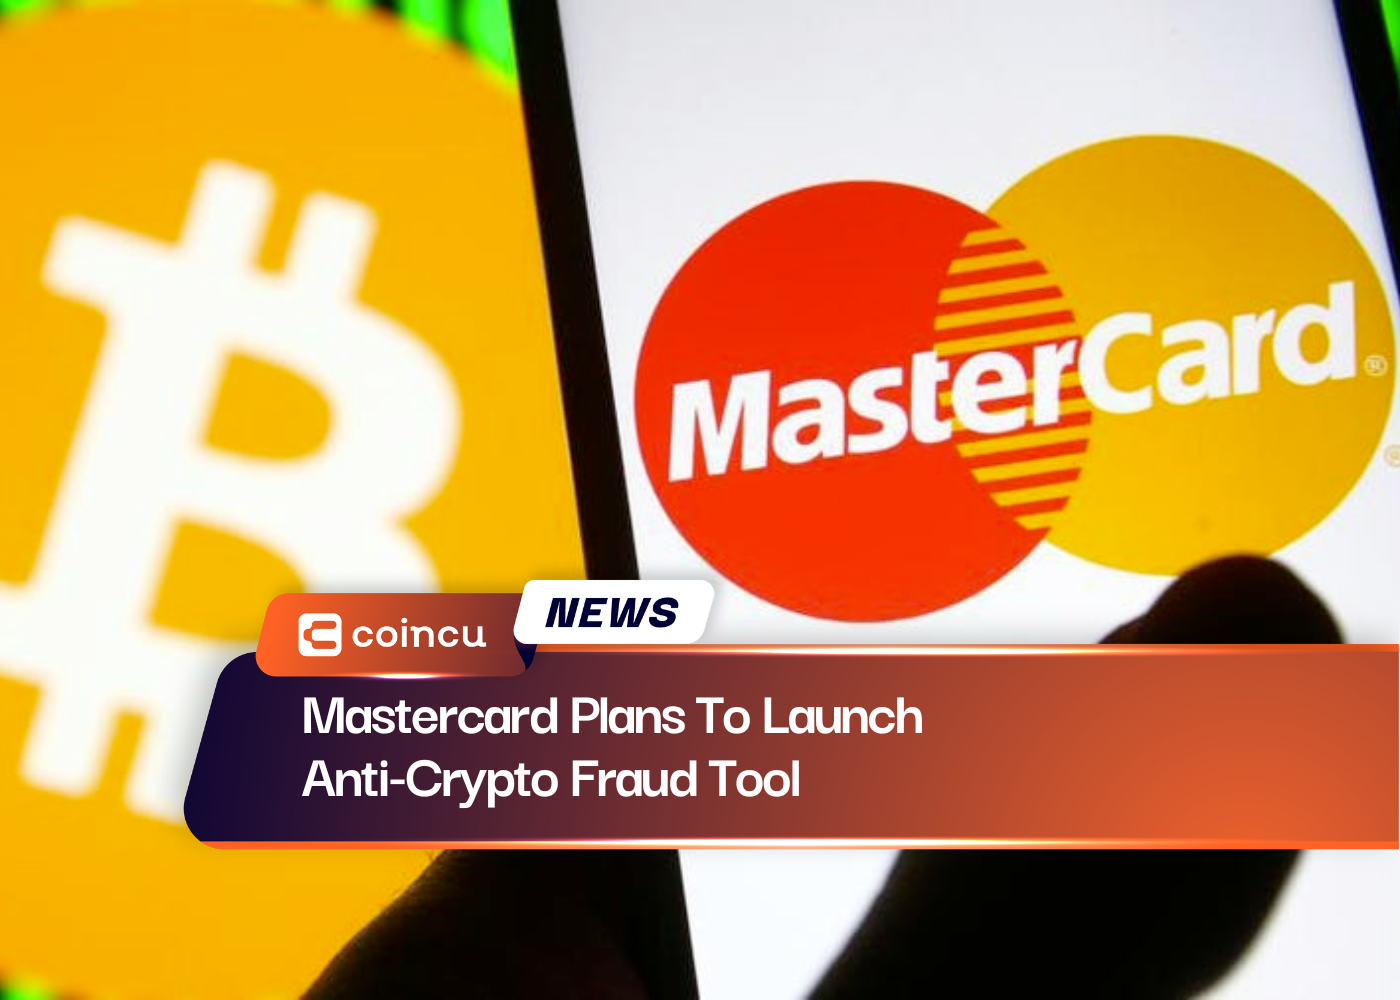 Mastercard Plans To Launch Anti-Crypto Fraud Tool